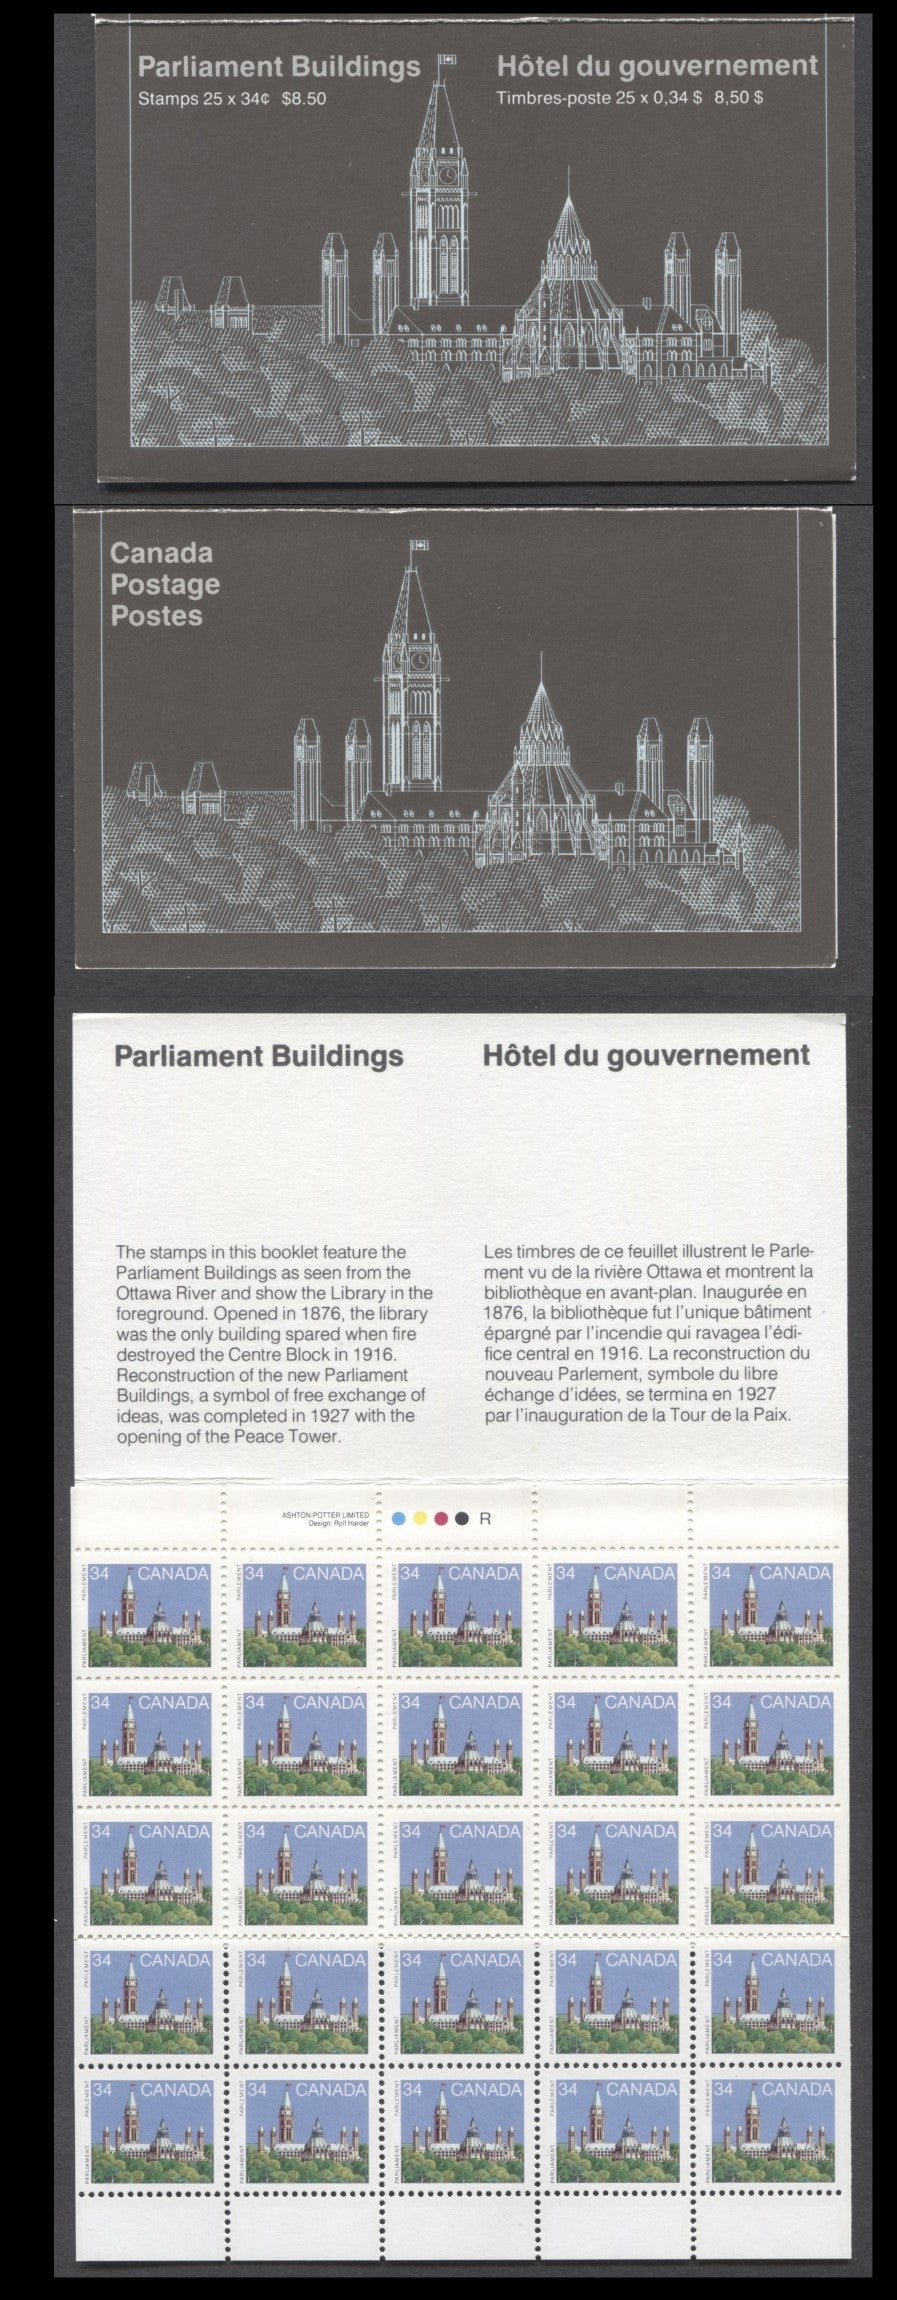 Lot 6A Canada #BK89Aa 1985 Parliament Buildings Issue, A 34c Multicolored Booklet, MF Pane & LF Cover, Rolland Paper, Type 1, BABN, Perf 13.3 x 14